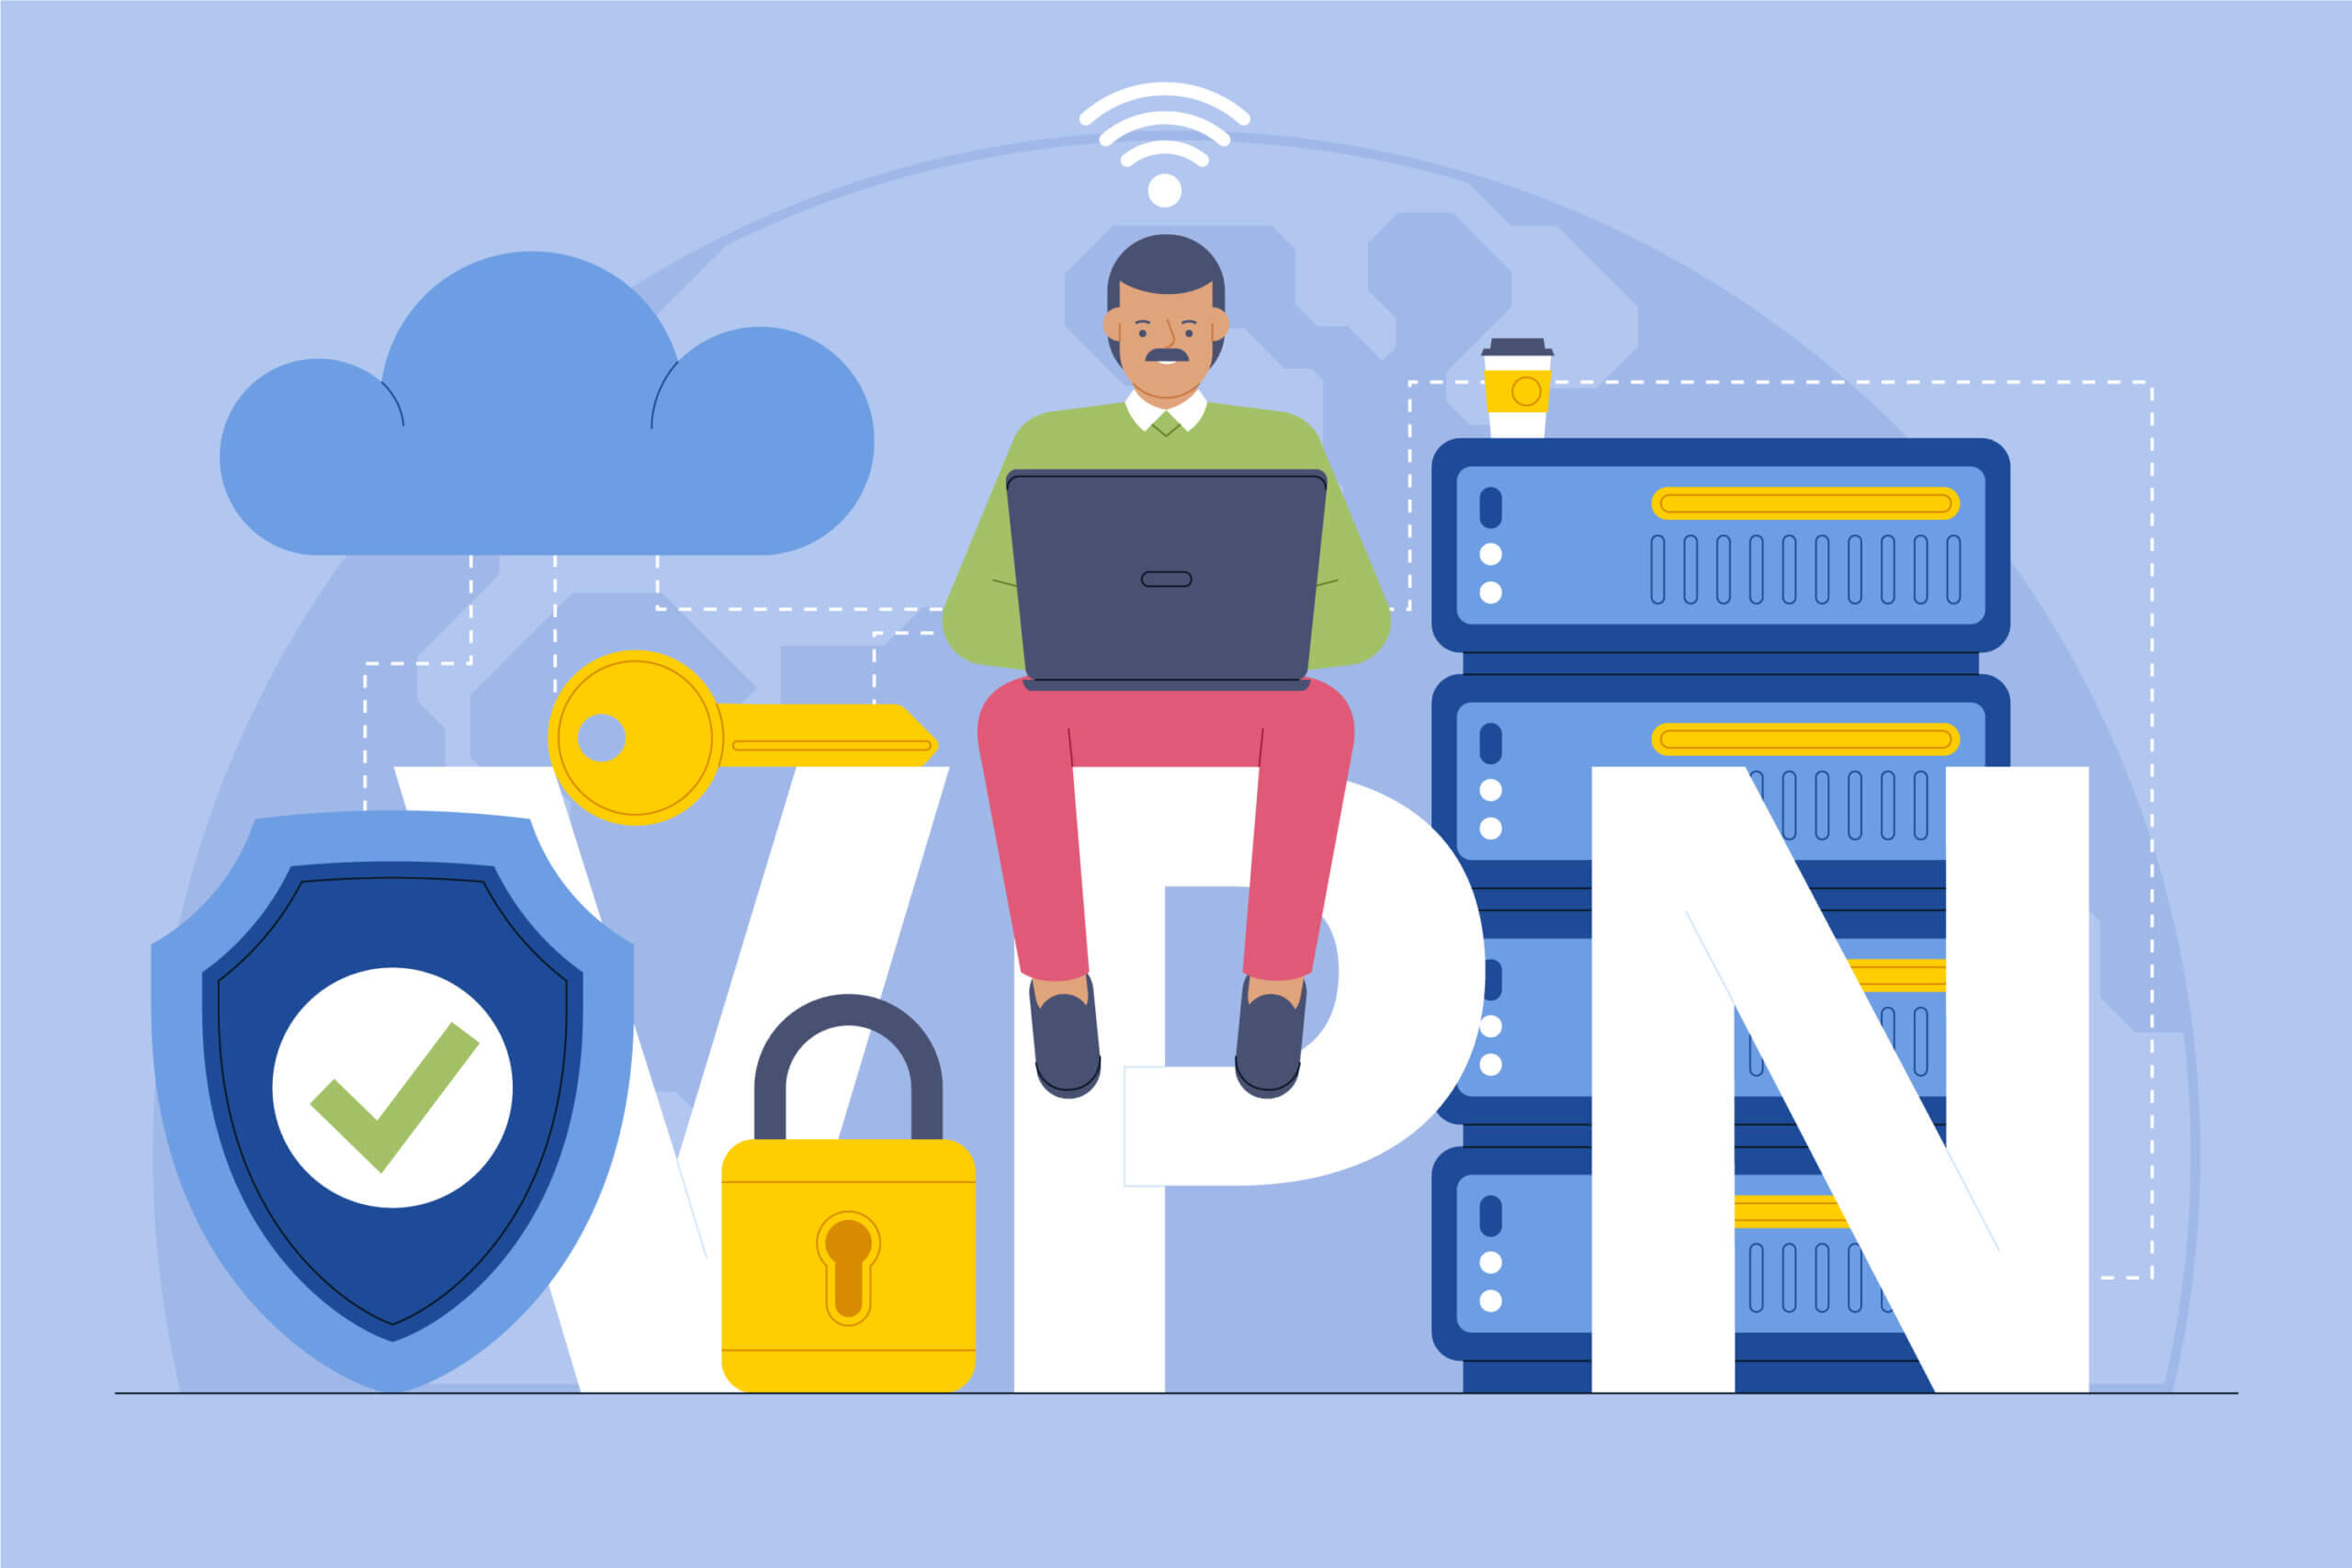 The Ultimate Guide to VPNs: What Does a VPN Protect You From?